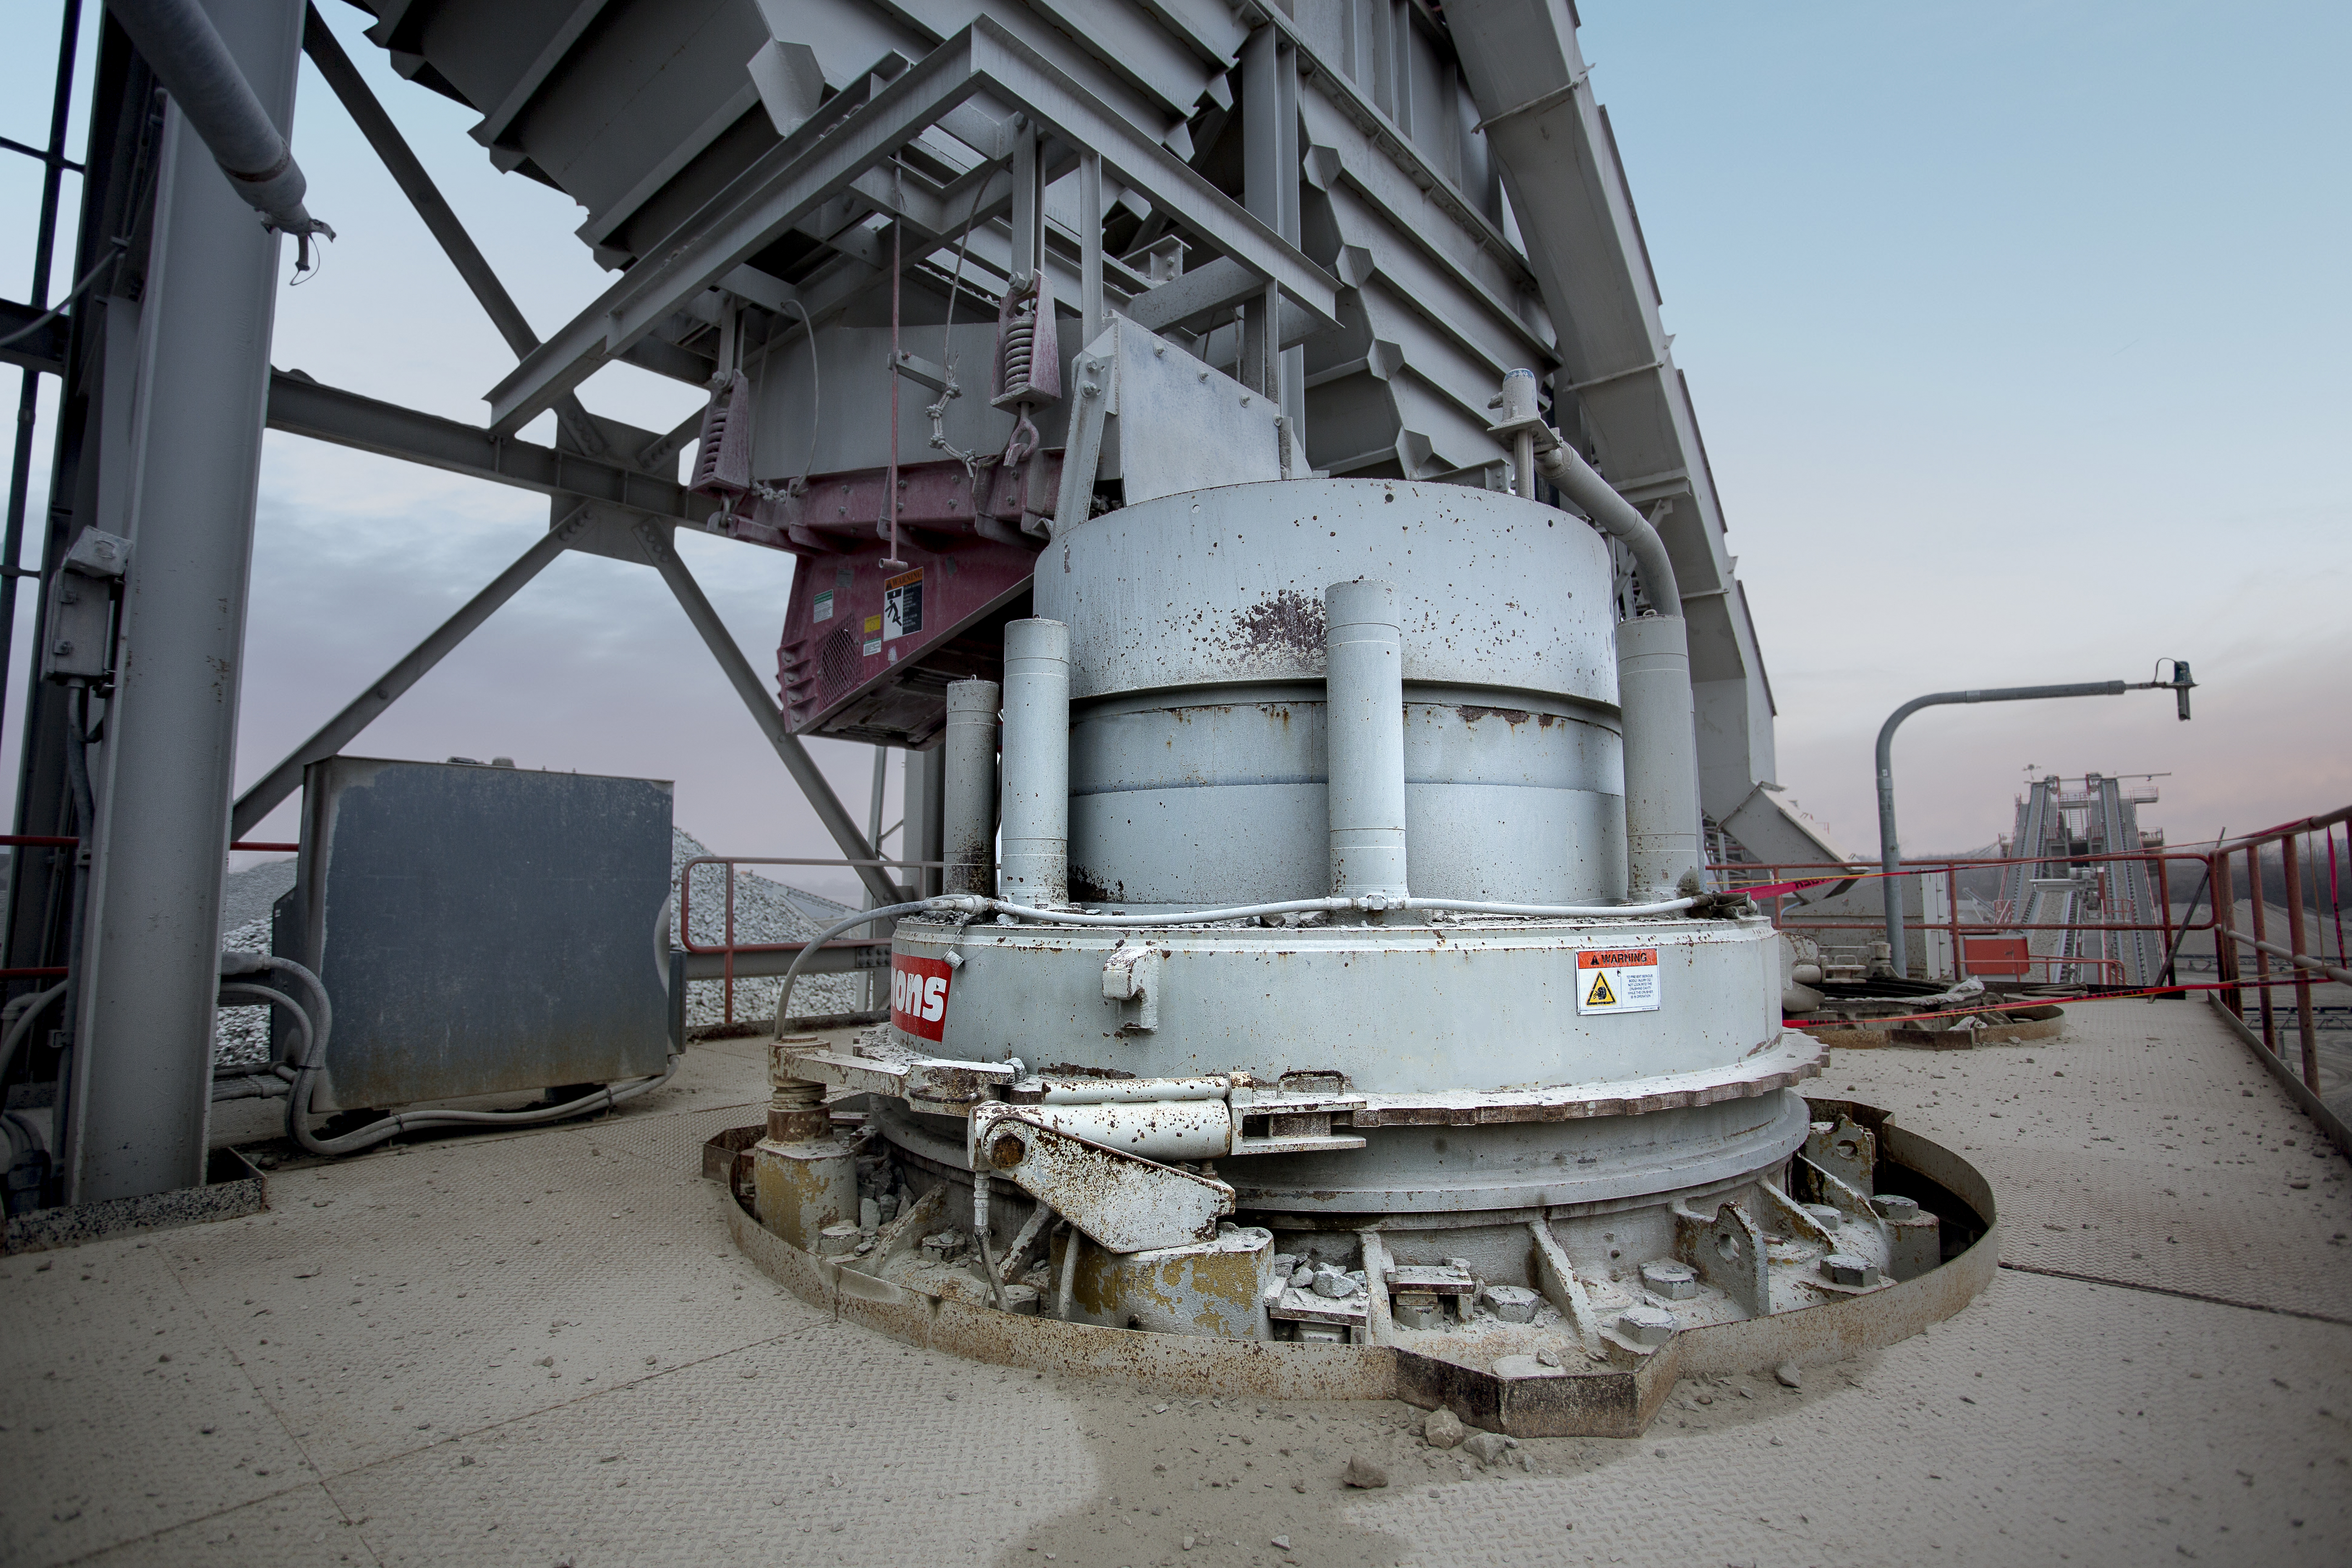 Symons cone crusher at Lehigh Hanson's Harding Street plant in Indianapolis, IN, USA